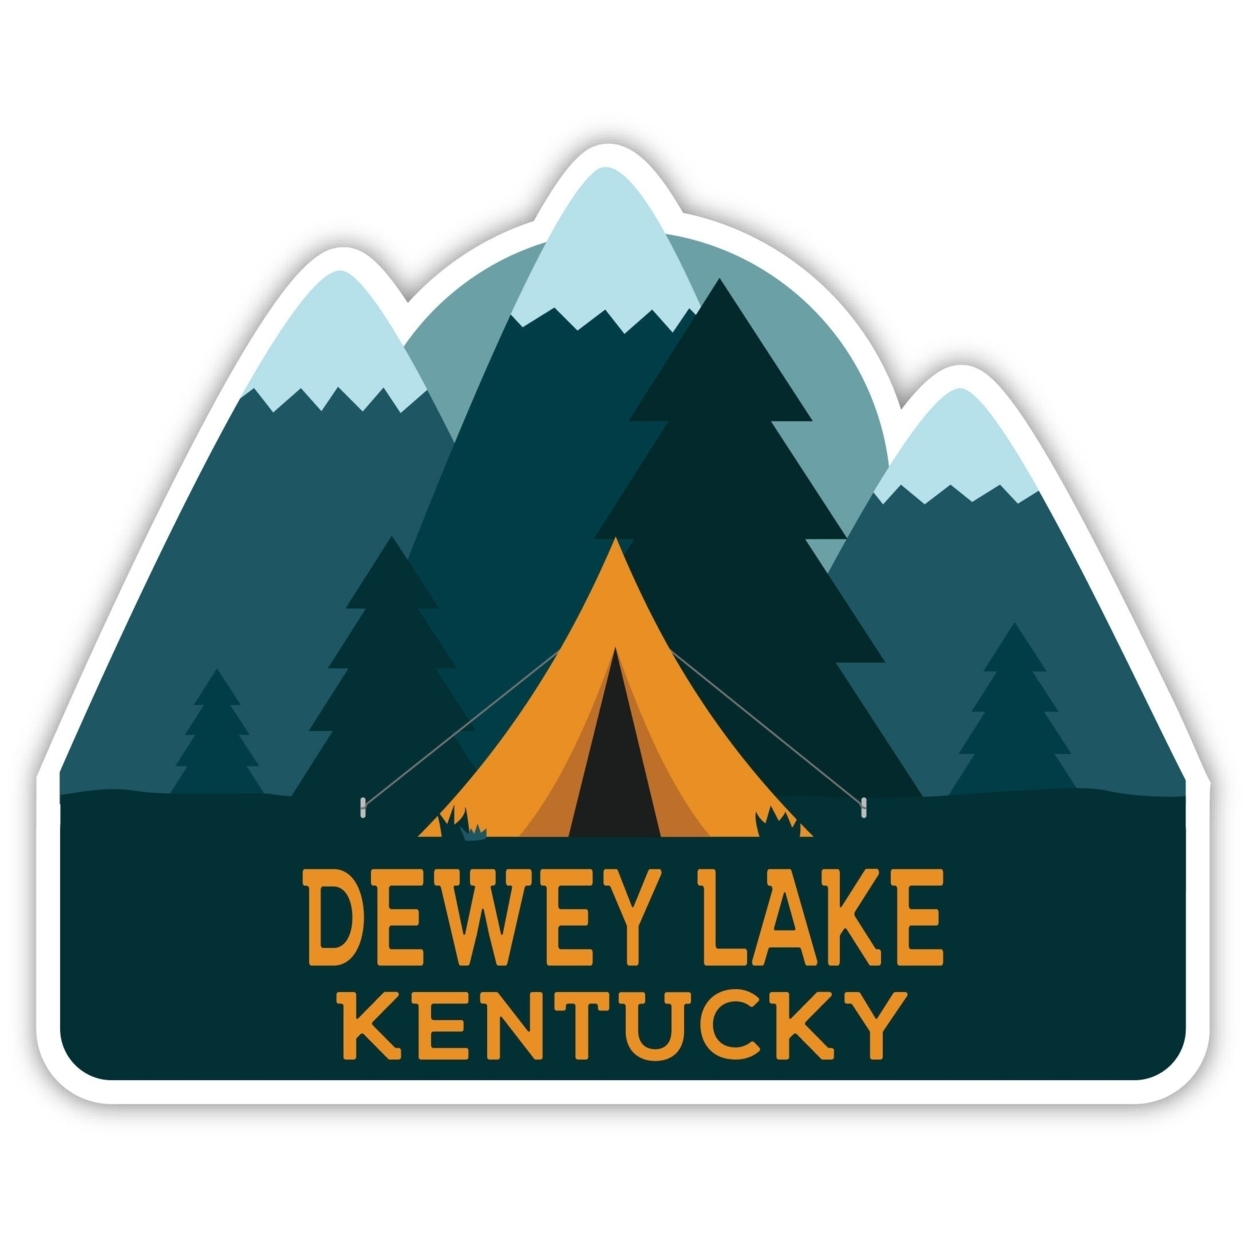 Dewey Lake Kentucky Souvenir Decorative Stickers (Choose Theme And Size) - 4-Pack, 4-Inch, Tent